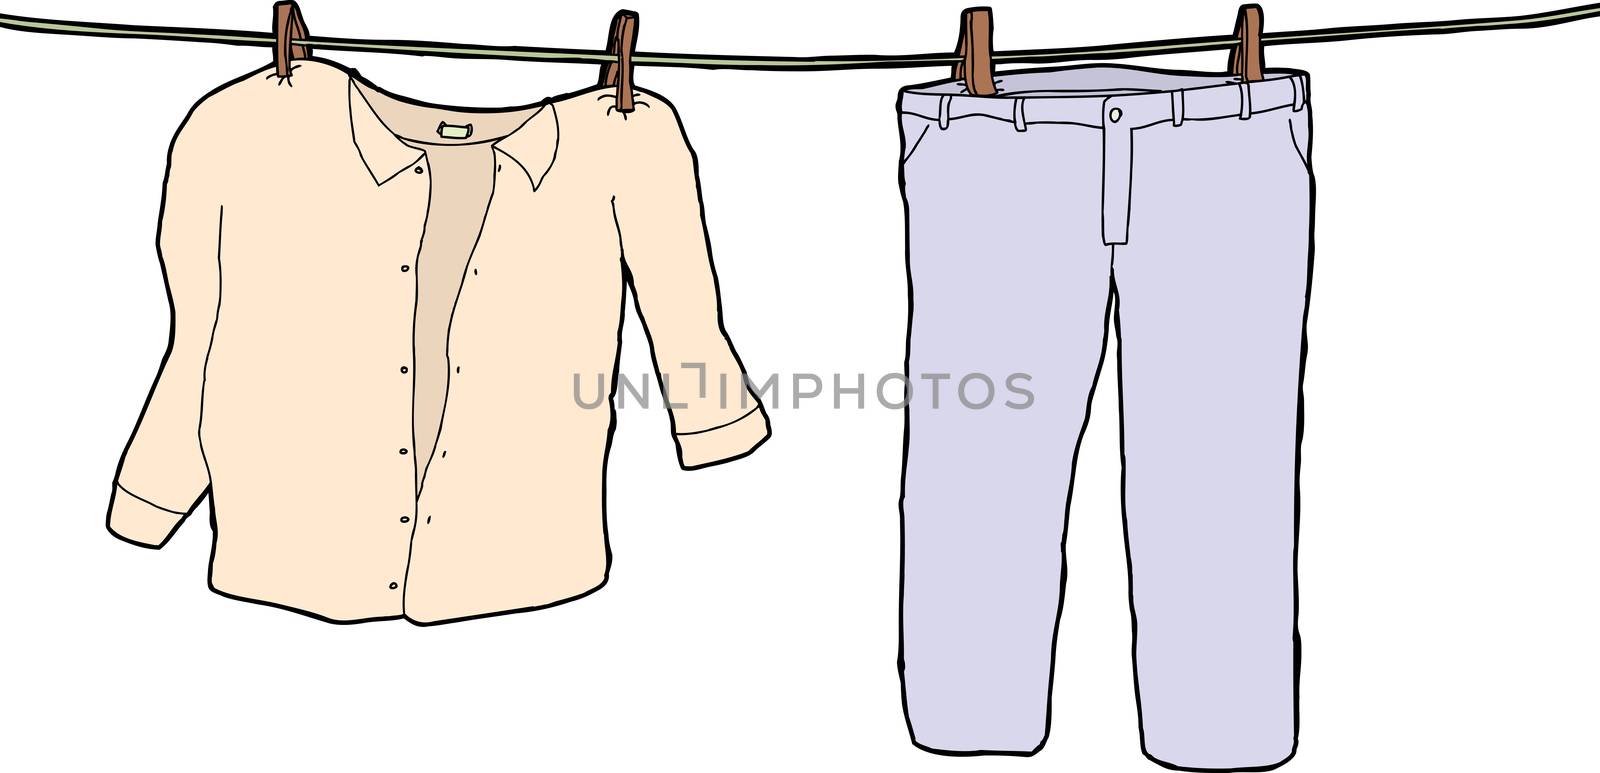 Pants and shirt on clothesline drying on white background